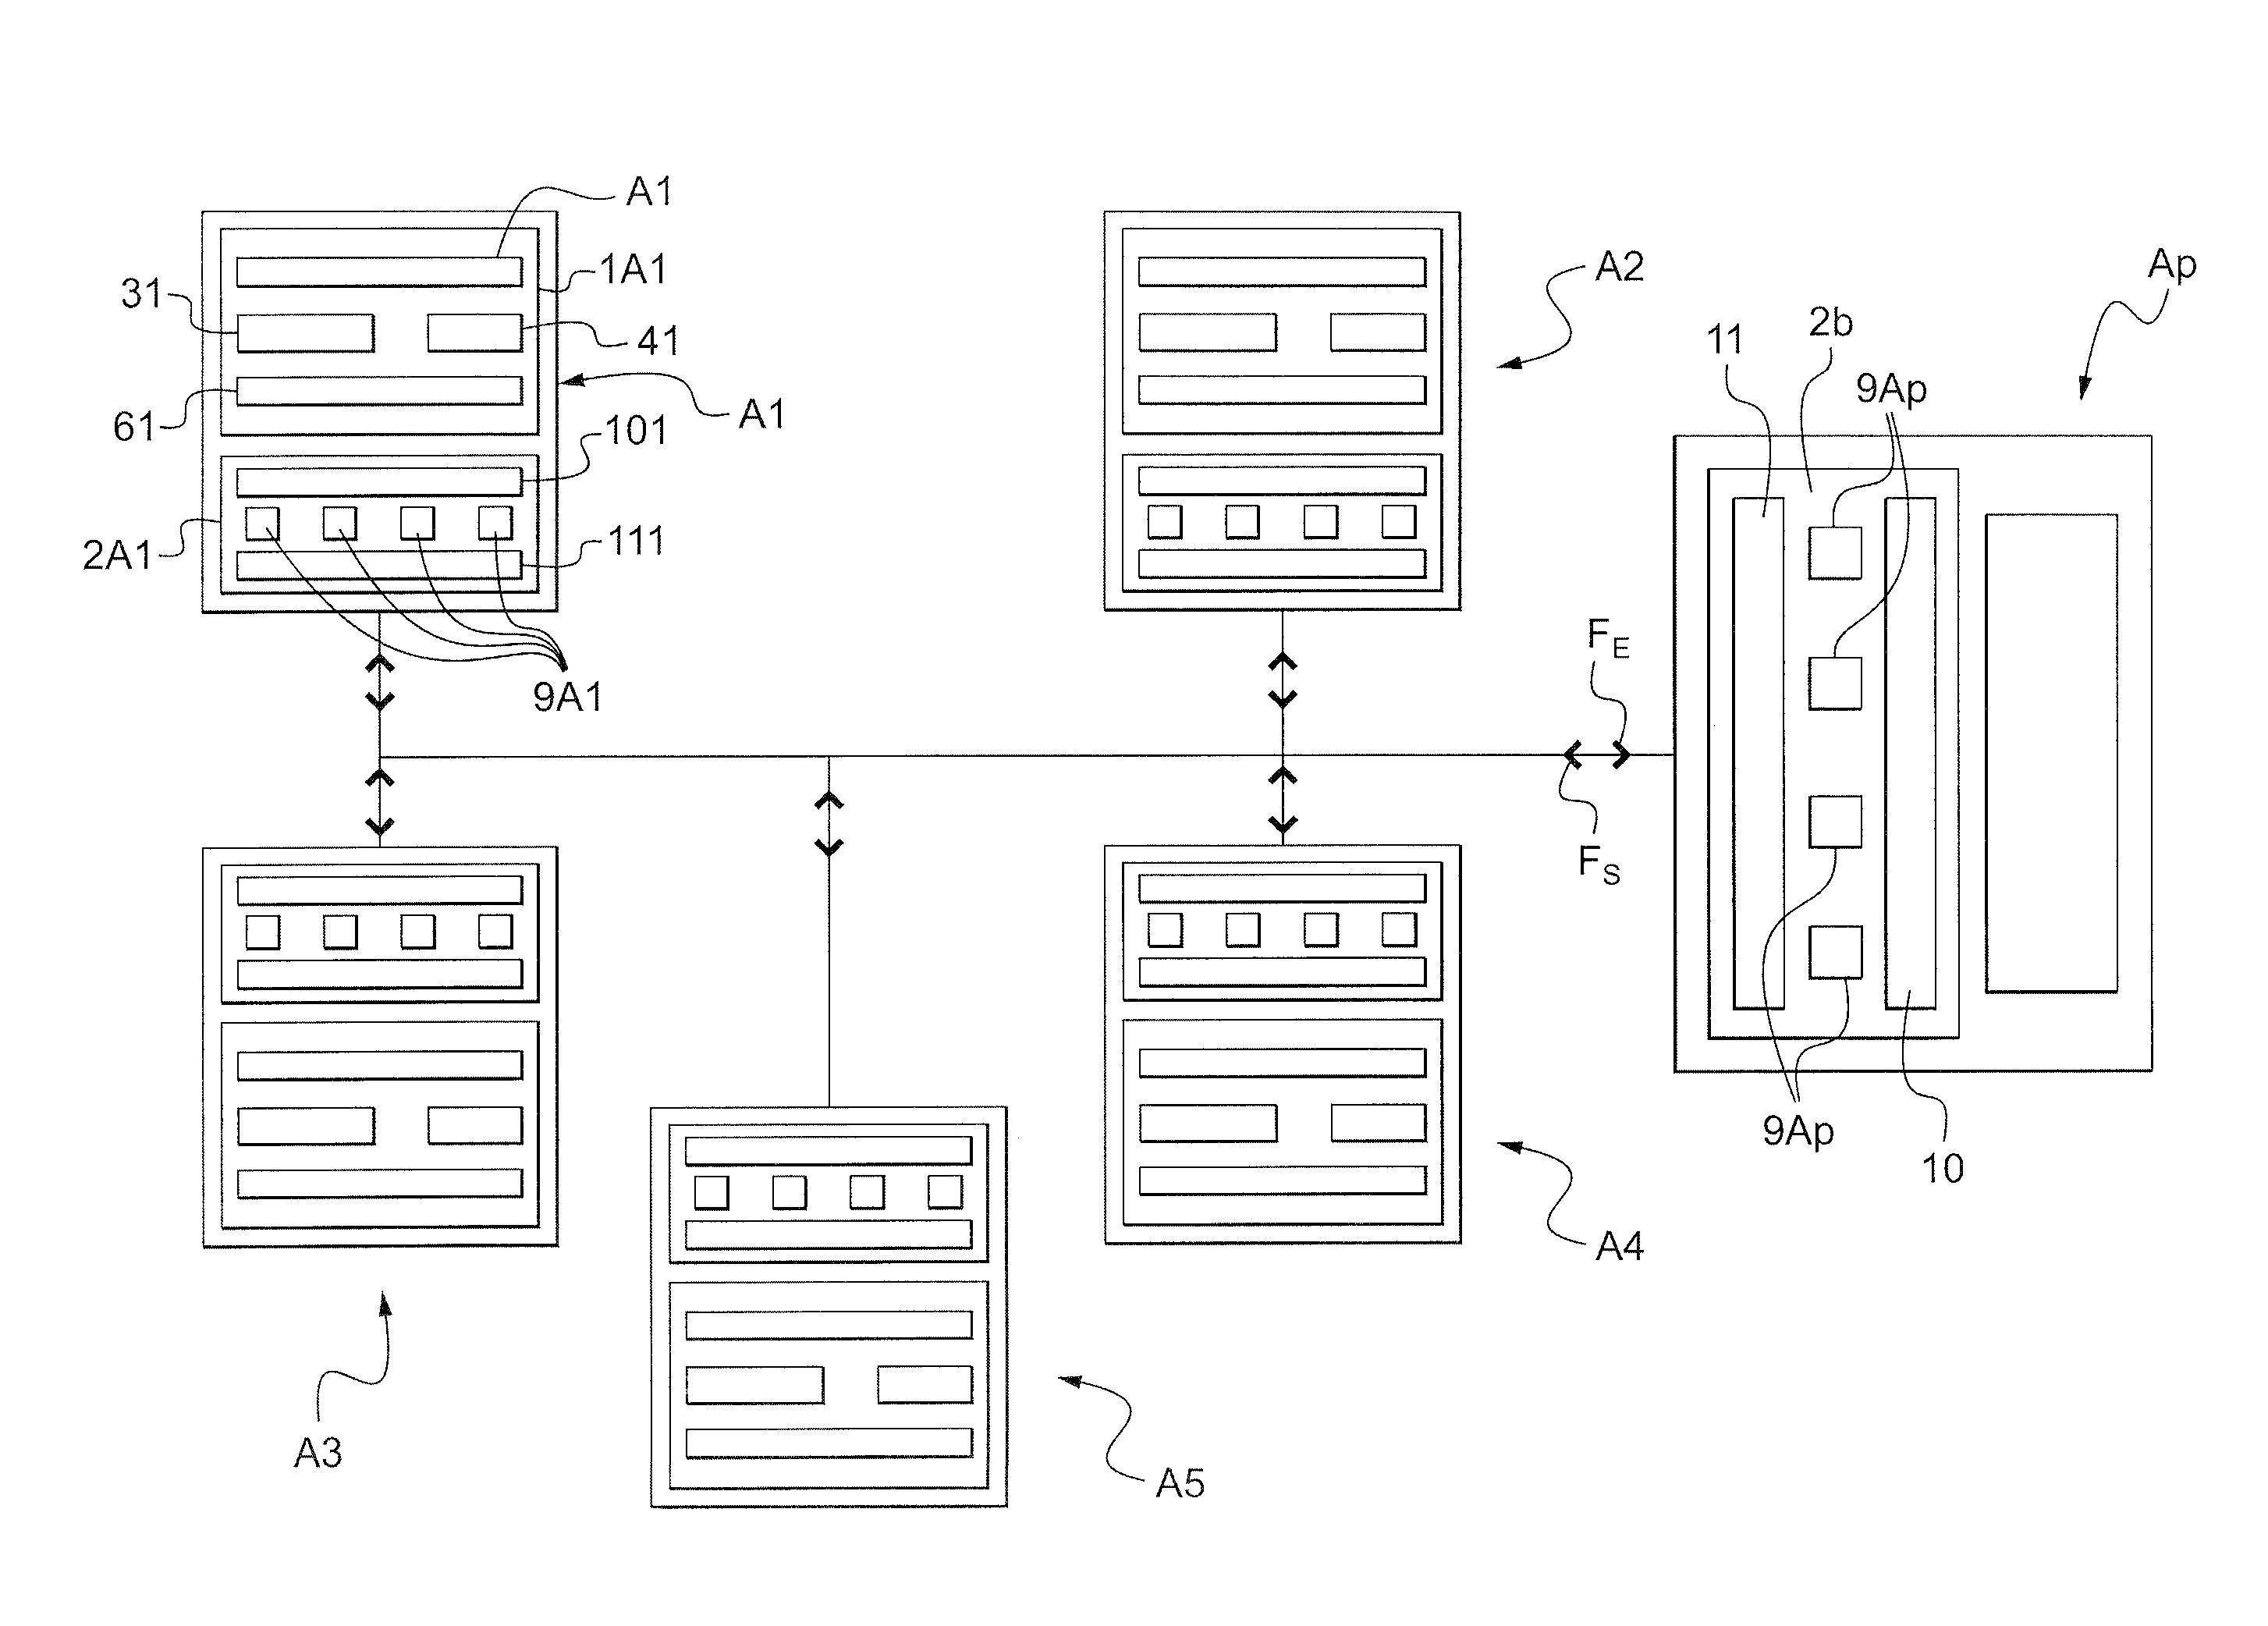 Control architecture and process for porting application software for equipment on board an aircraft to a consumer standard computer hardware  unit